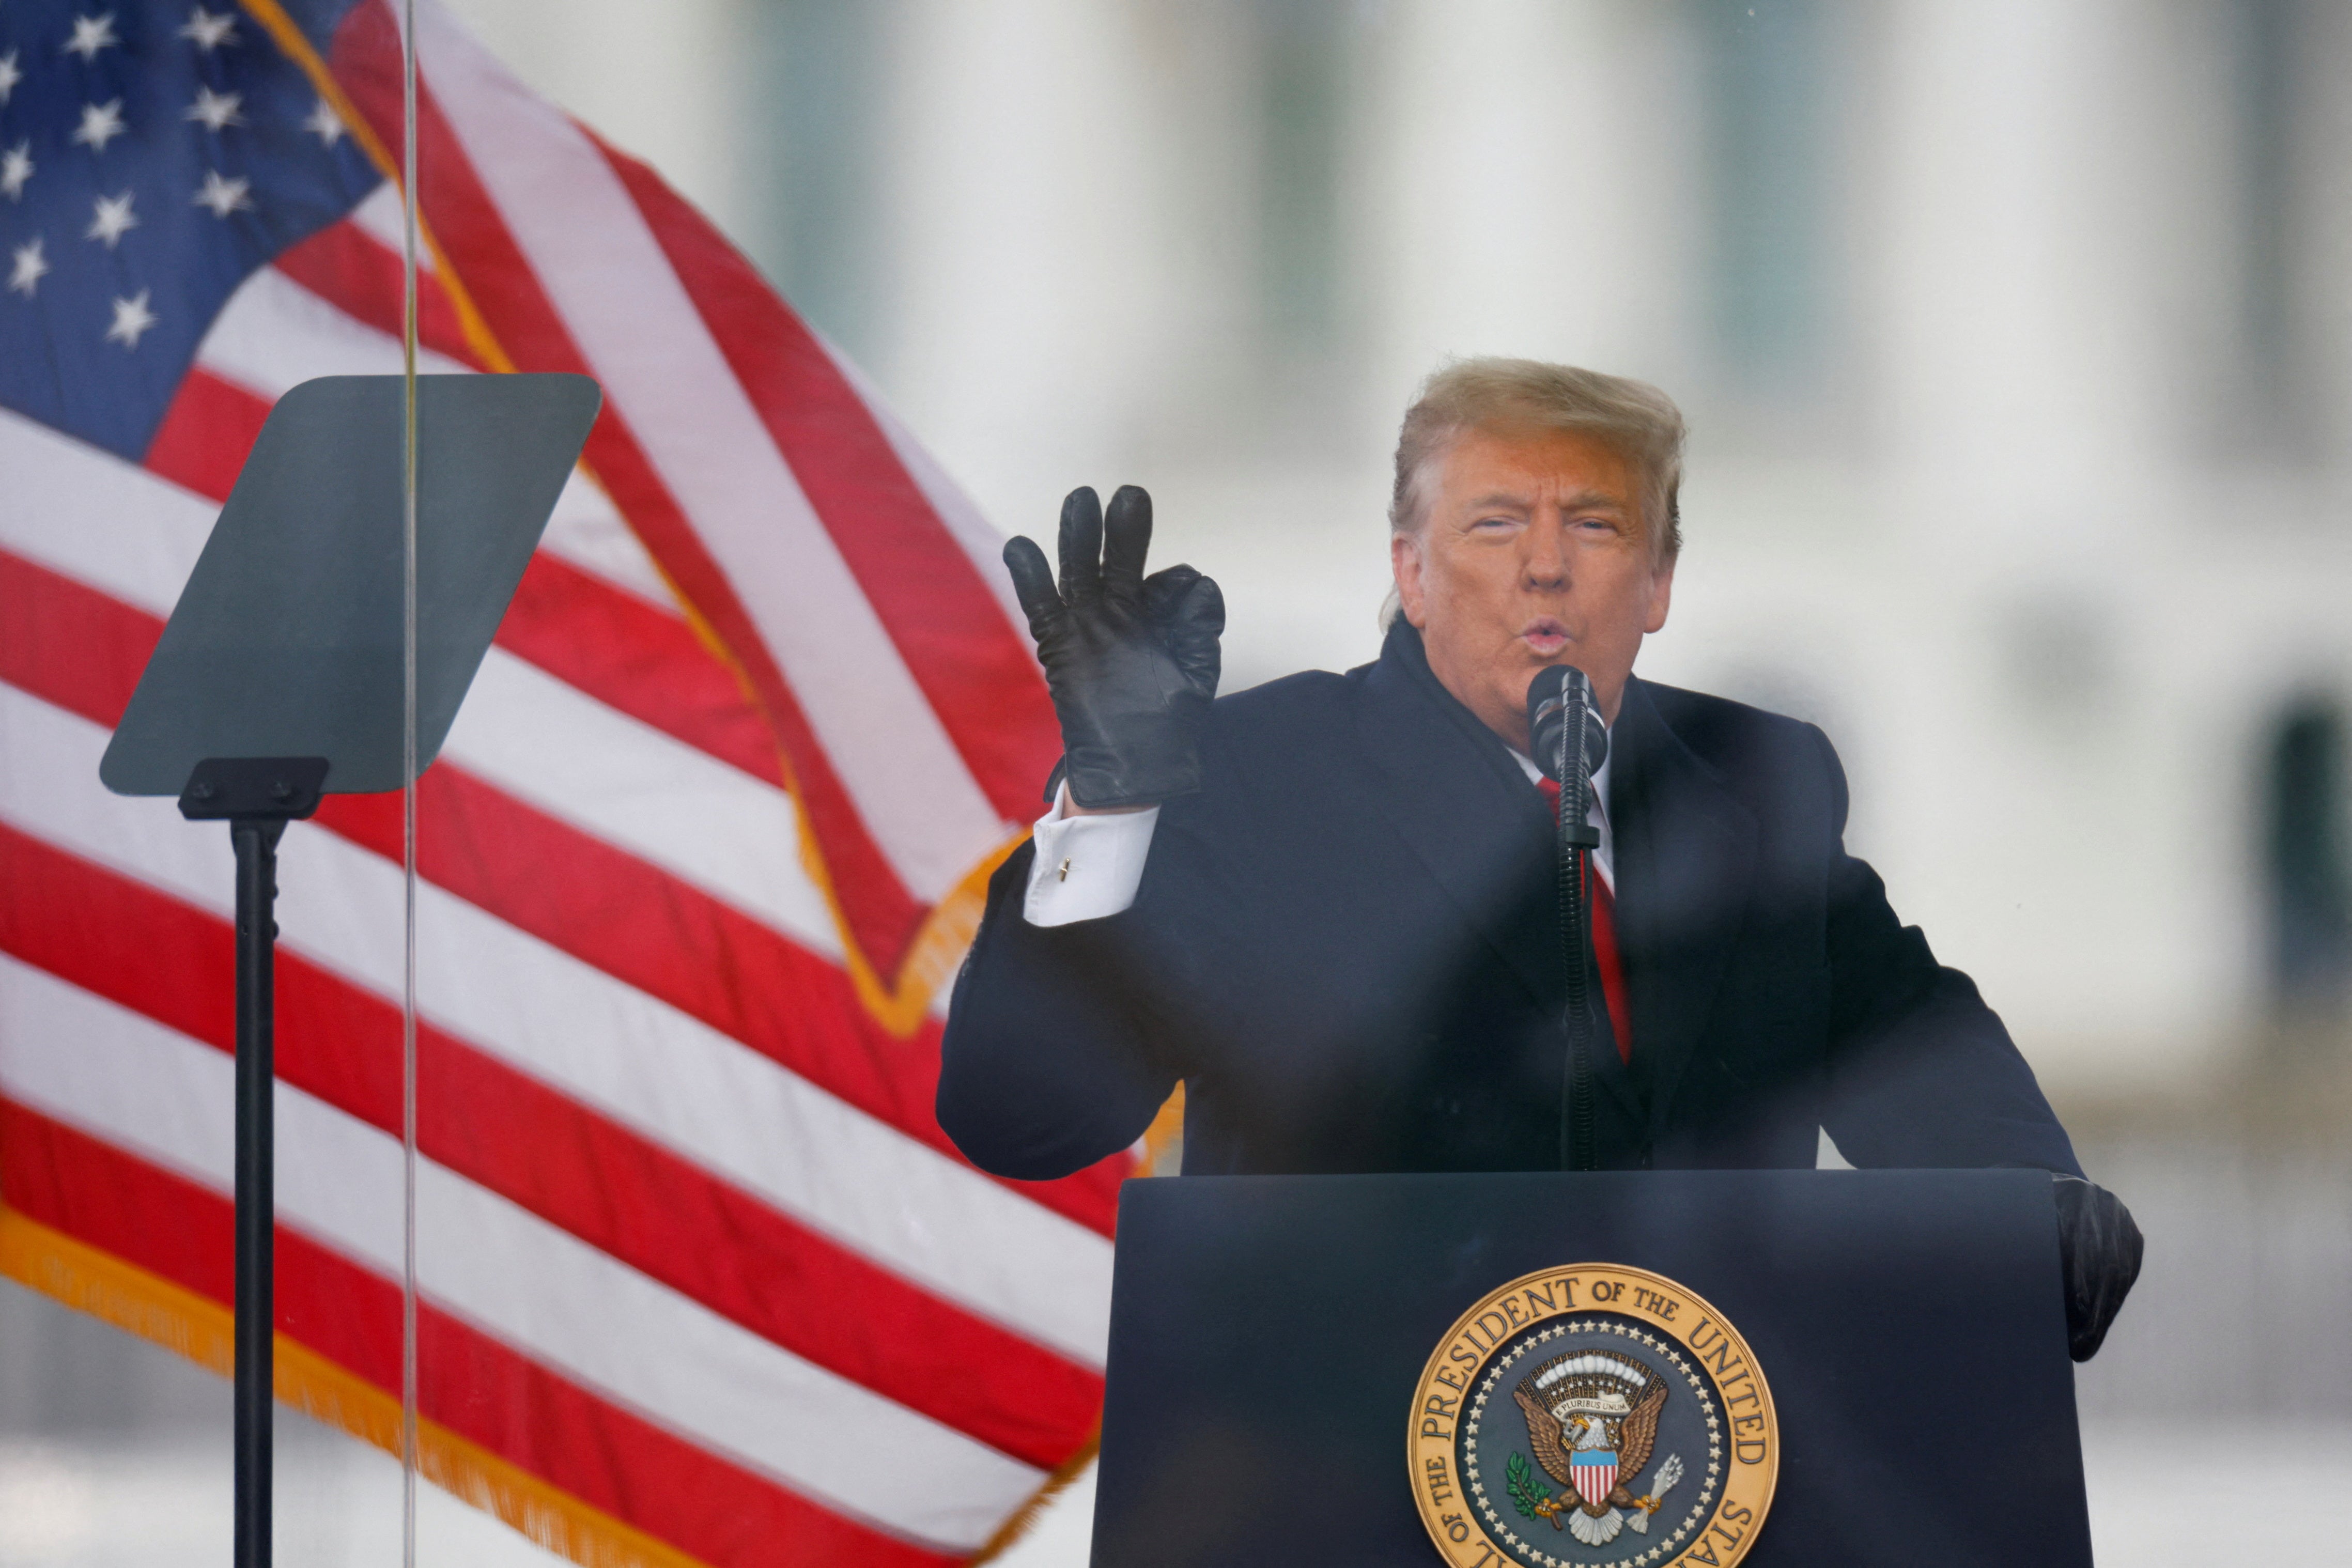 Donald Trump speaks to supporters in Washington DC on January 6, 2021, before a mob stormed the Capitol to stop the certification of Joe Biden’s victory – actions at the center of the election interference case against the former president